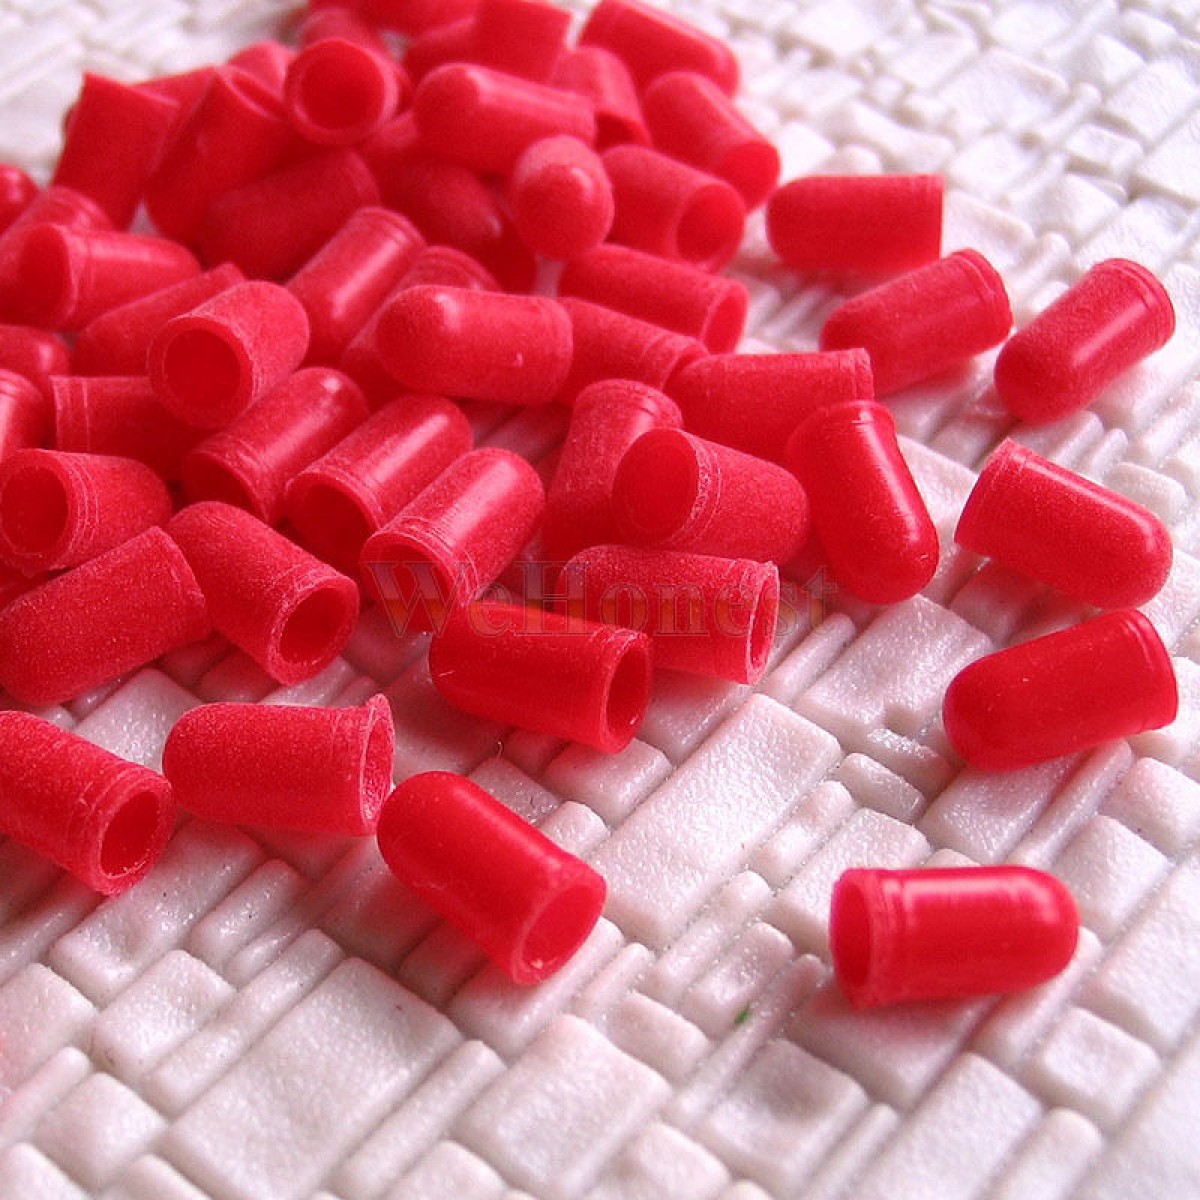 20 pcs Red Caps / Cover for 3mm Grain of Wheat Bulbs